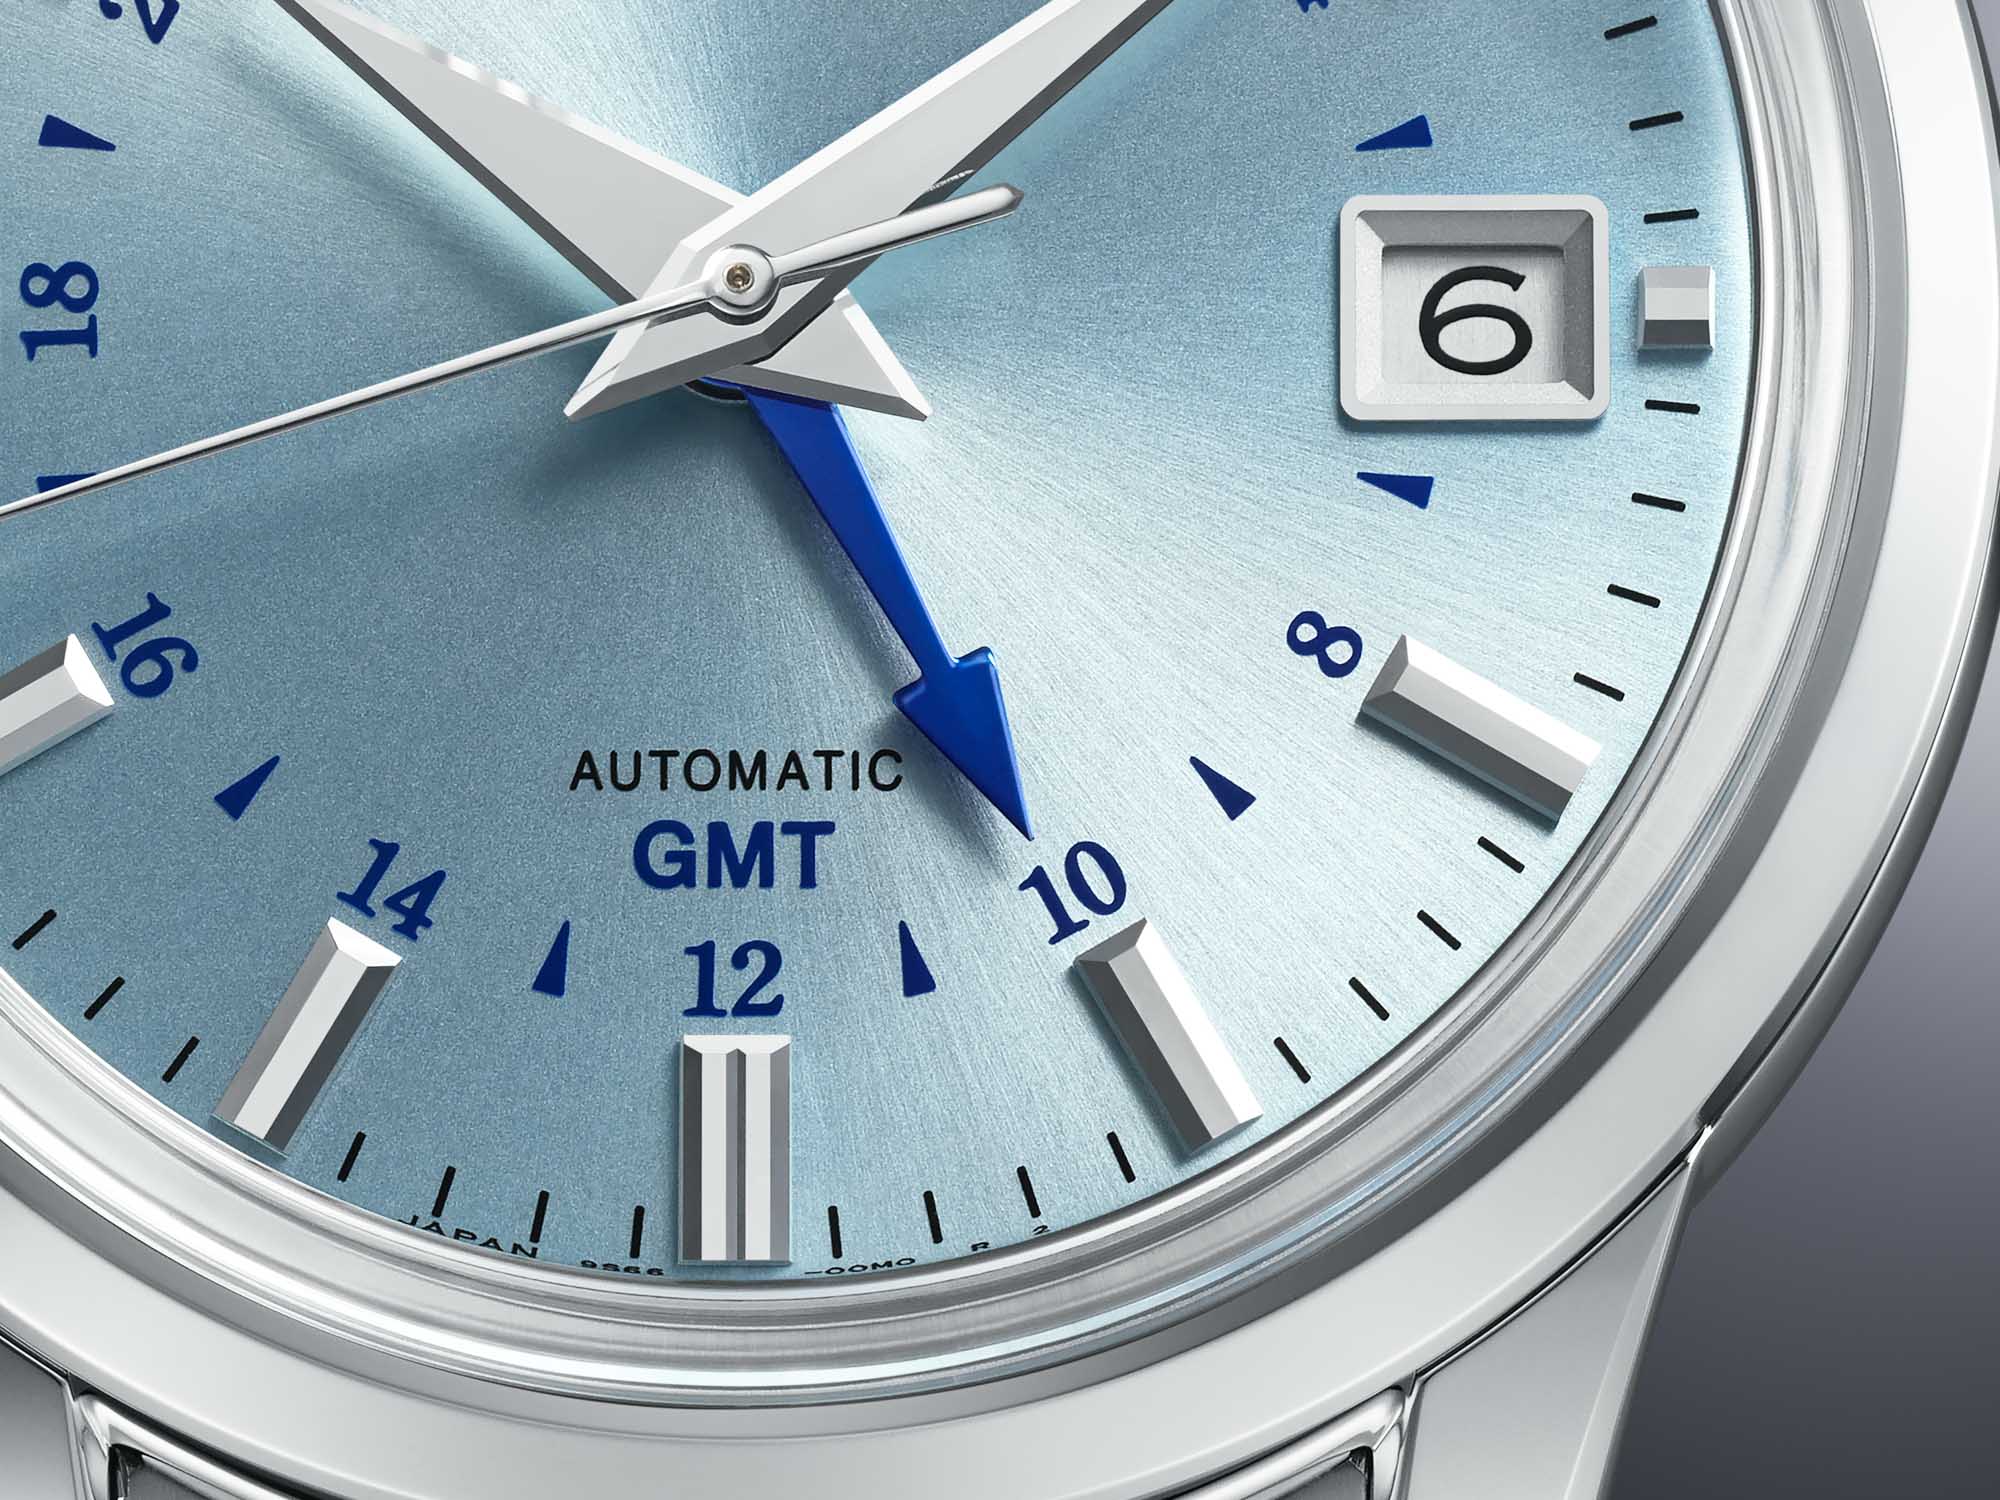 Grand Seiko Launches Two New GMT Models with Baby Blue Dials